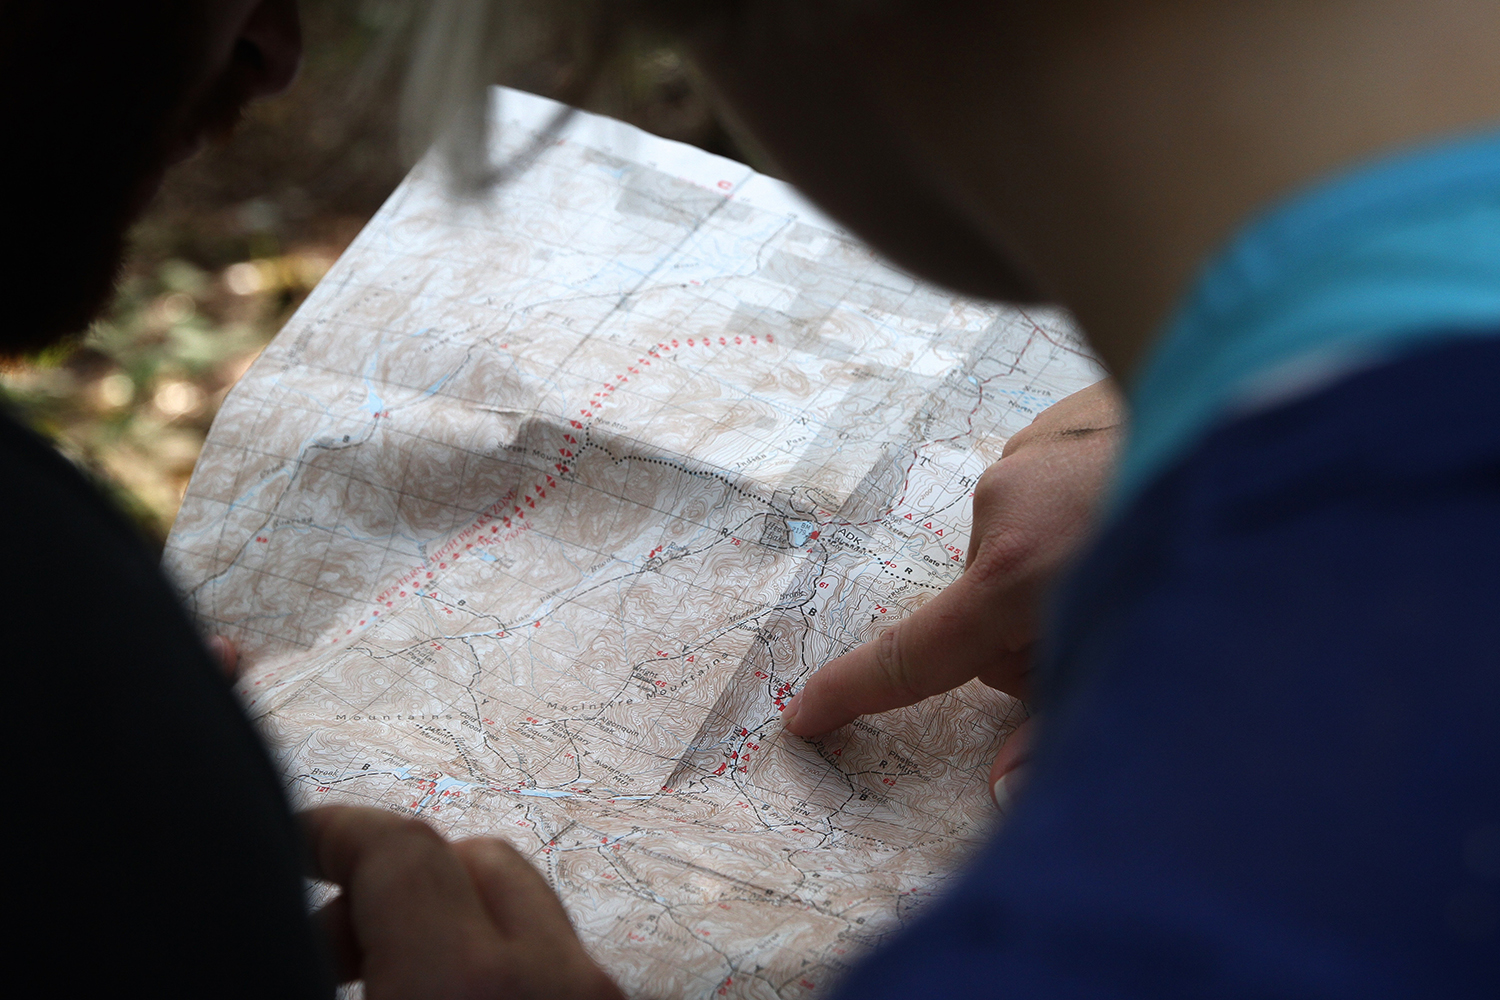 How to navigate with a compass and map